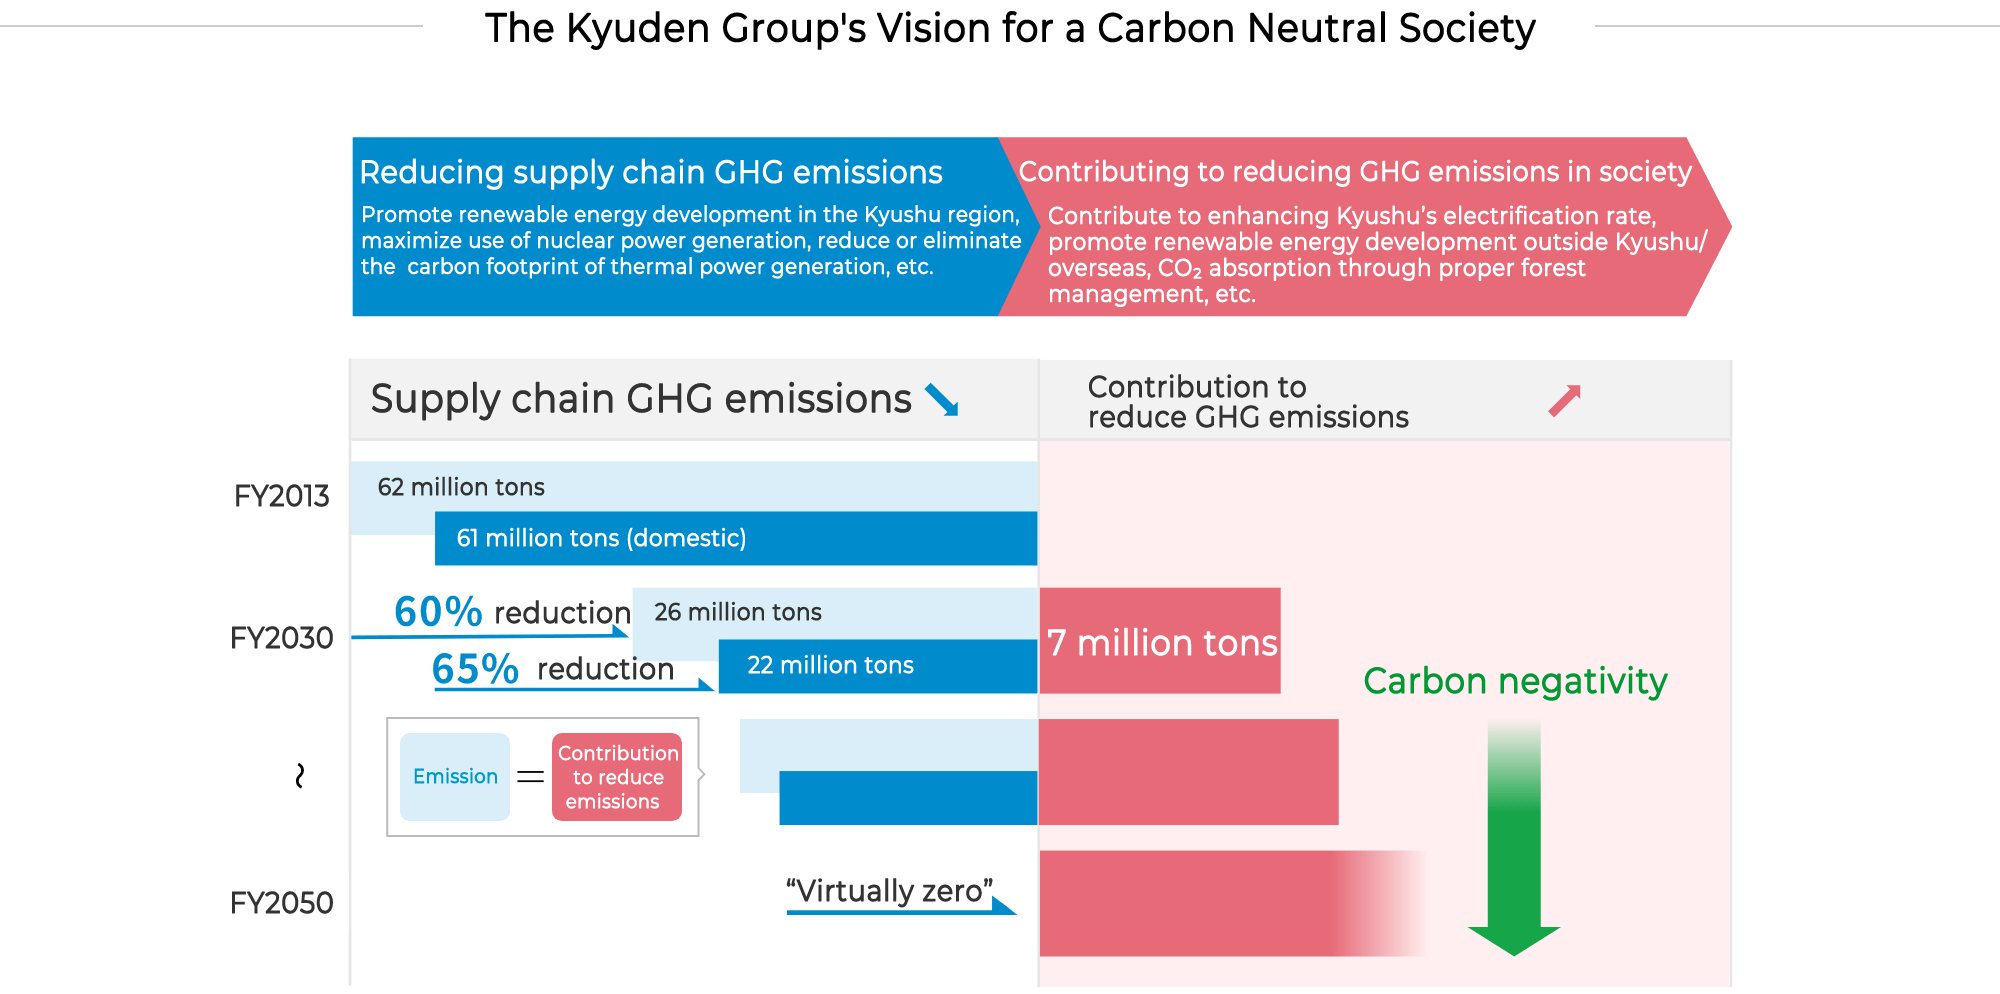 The Kyuden Group's Vision for a Carbon Neutral Society